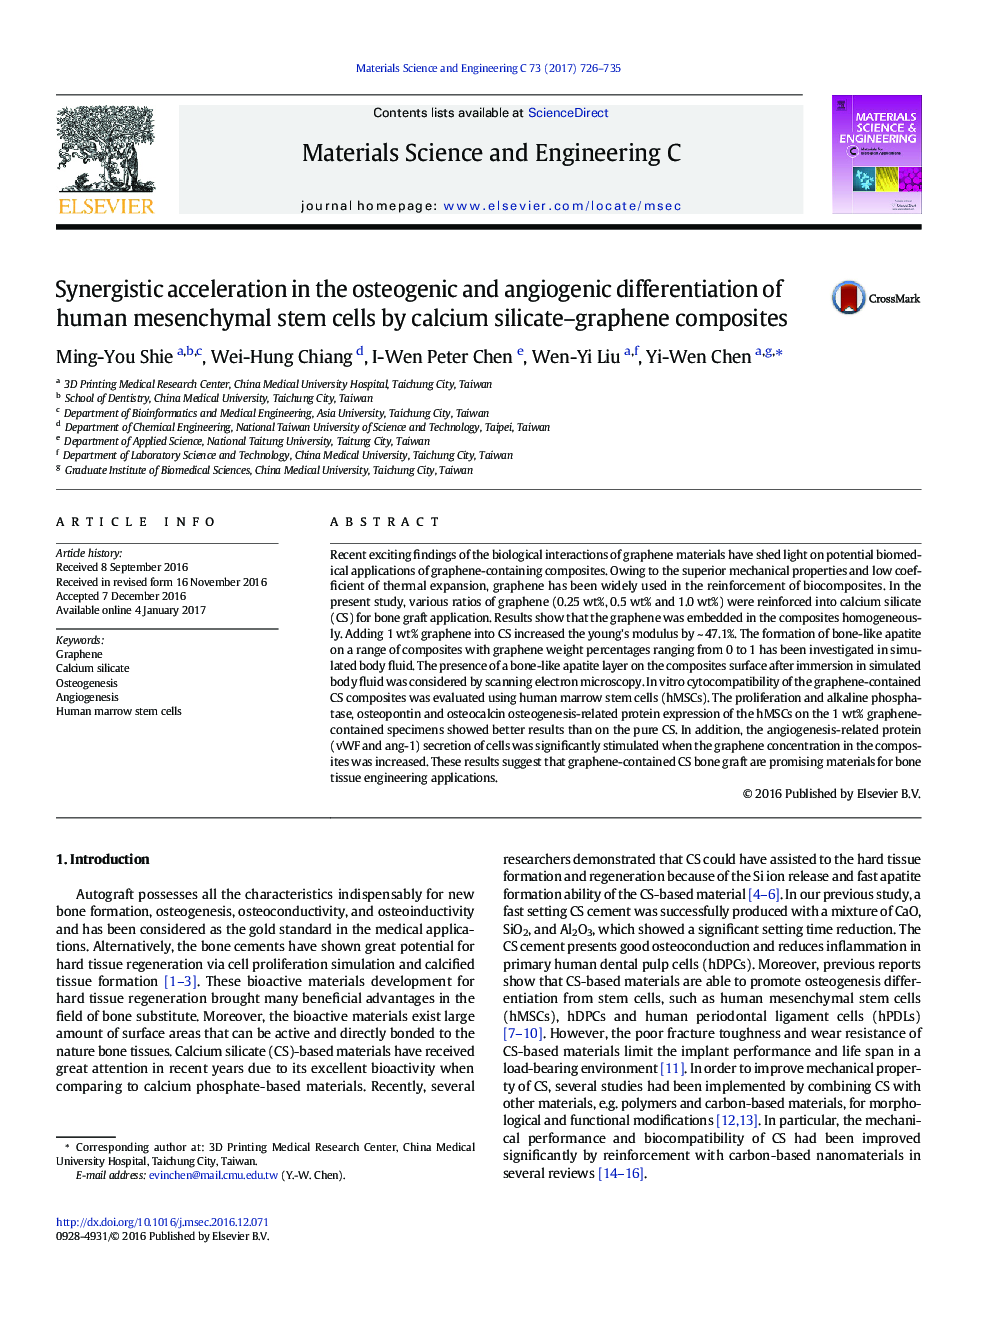 Synergistic acceleration in the osteogenic and angiogenic differentiation of human mesenchymal stem cells by calcium silicate-graphene composites